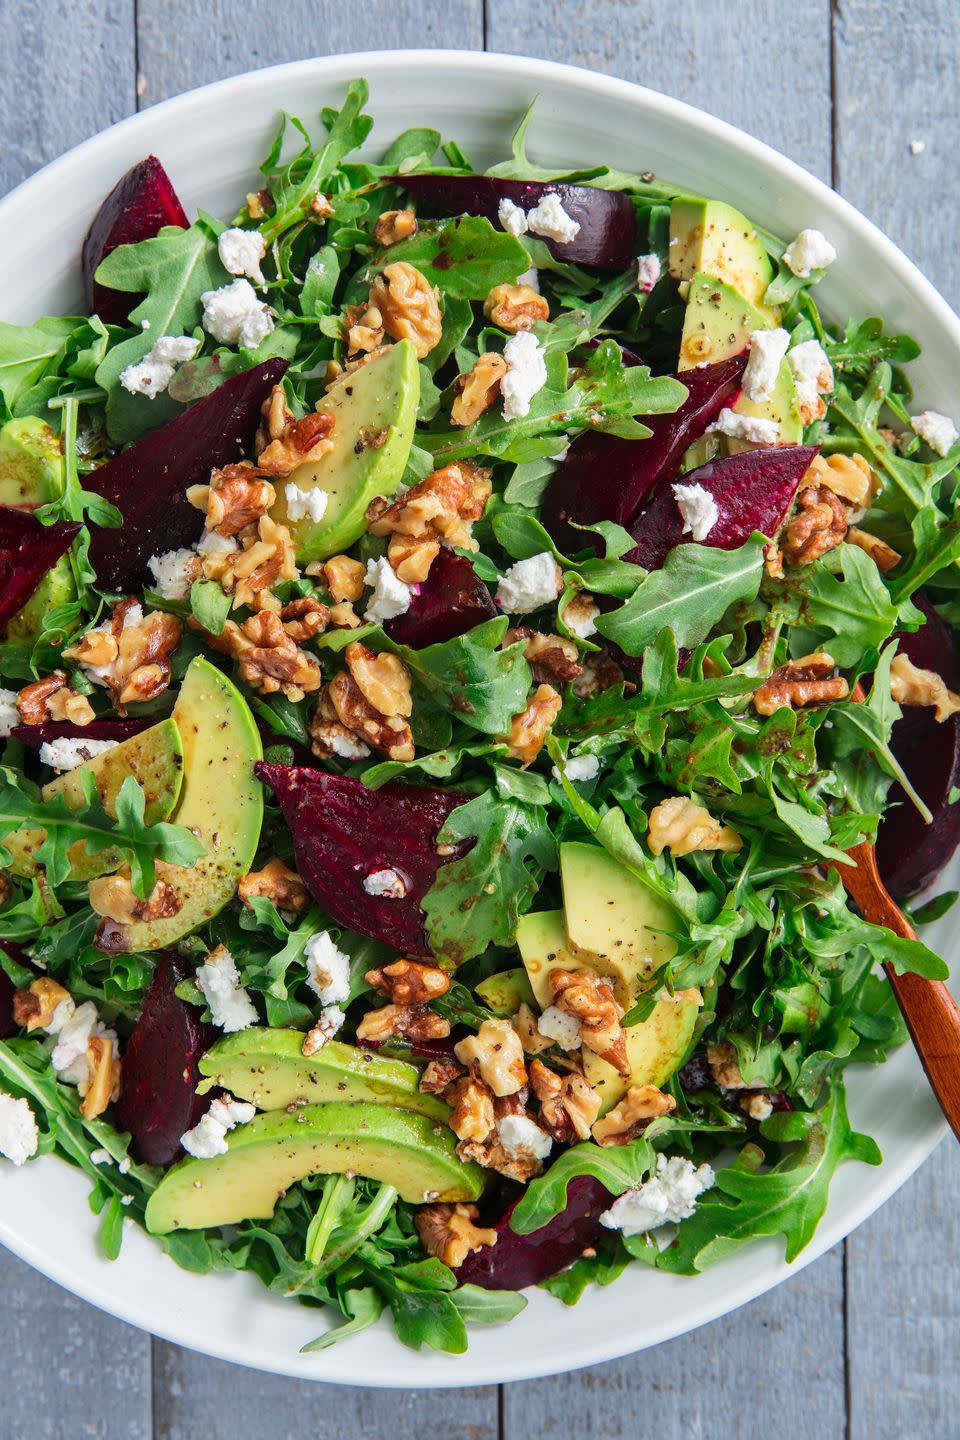 <p>Have you ever seen a more gorgeous salad?!</p><p>Get the recipe from <a href="https://www.delish.com/cooking/recipe-ideas/a20155300/roasted-beet-goat-cheese-salad-recipe/" rel="nofollow noopener" target="_blank" data-ylk="slk:Delish" class="link rapid-noclick-resp">Delish</a>.</p>